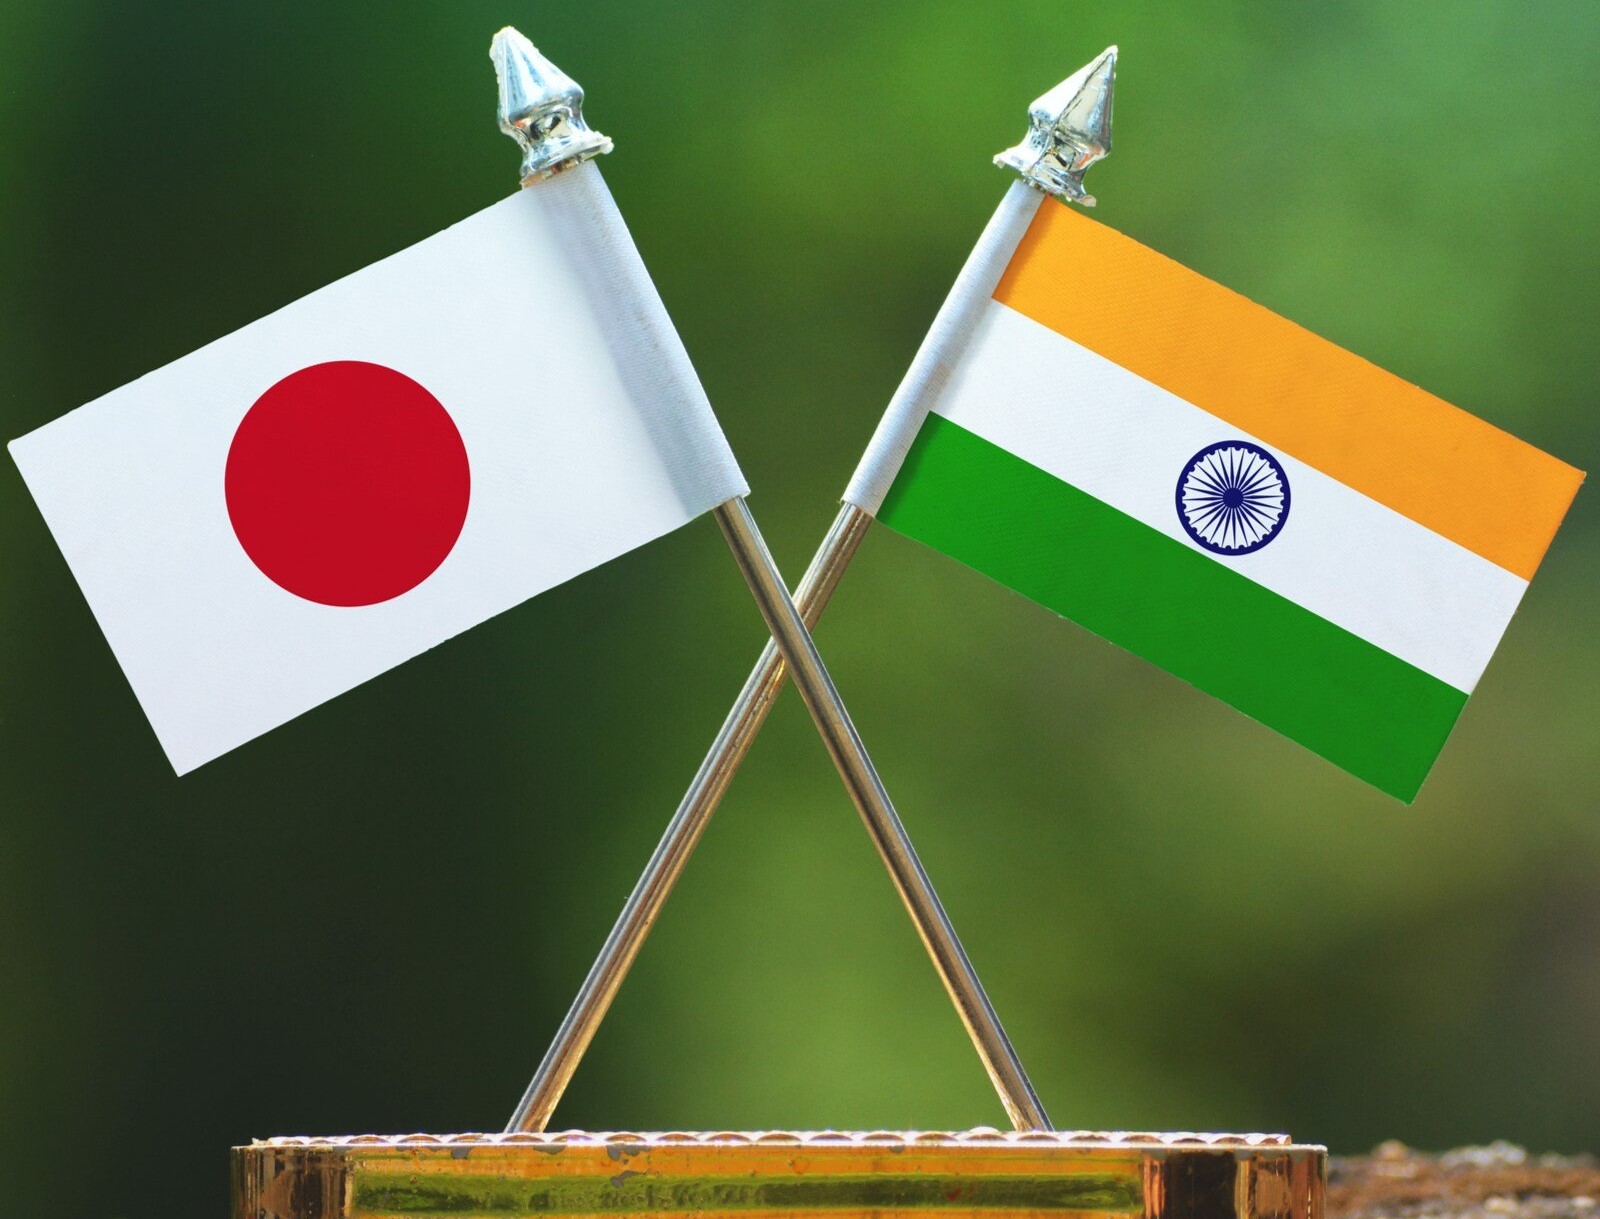 Cabinet approves MoC between India and Japan on Semiconductor Supply Chain